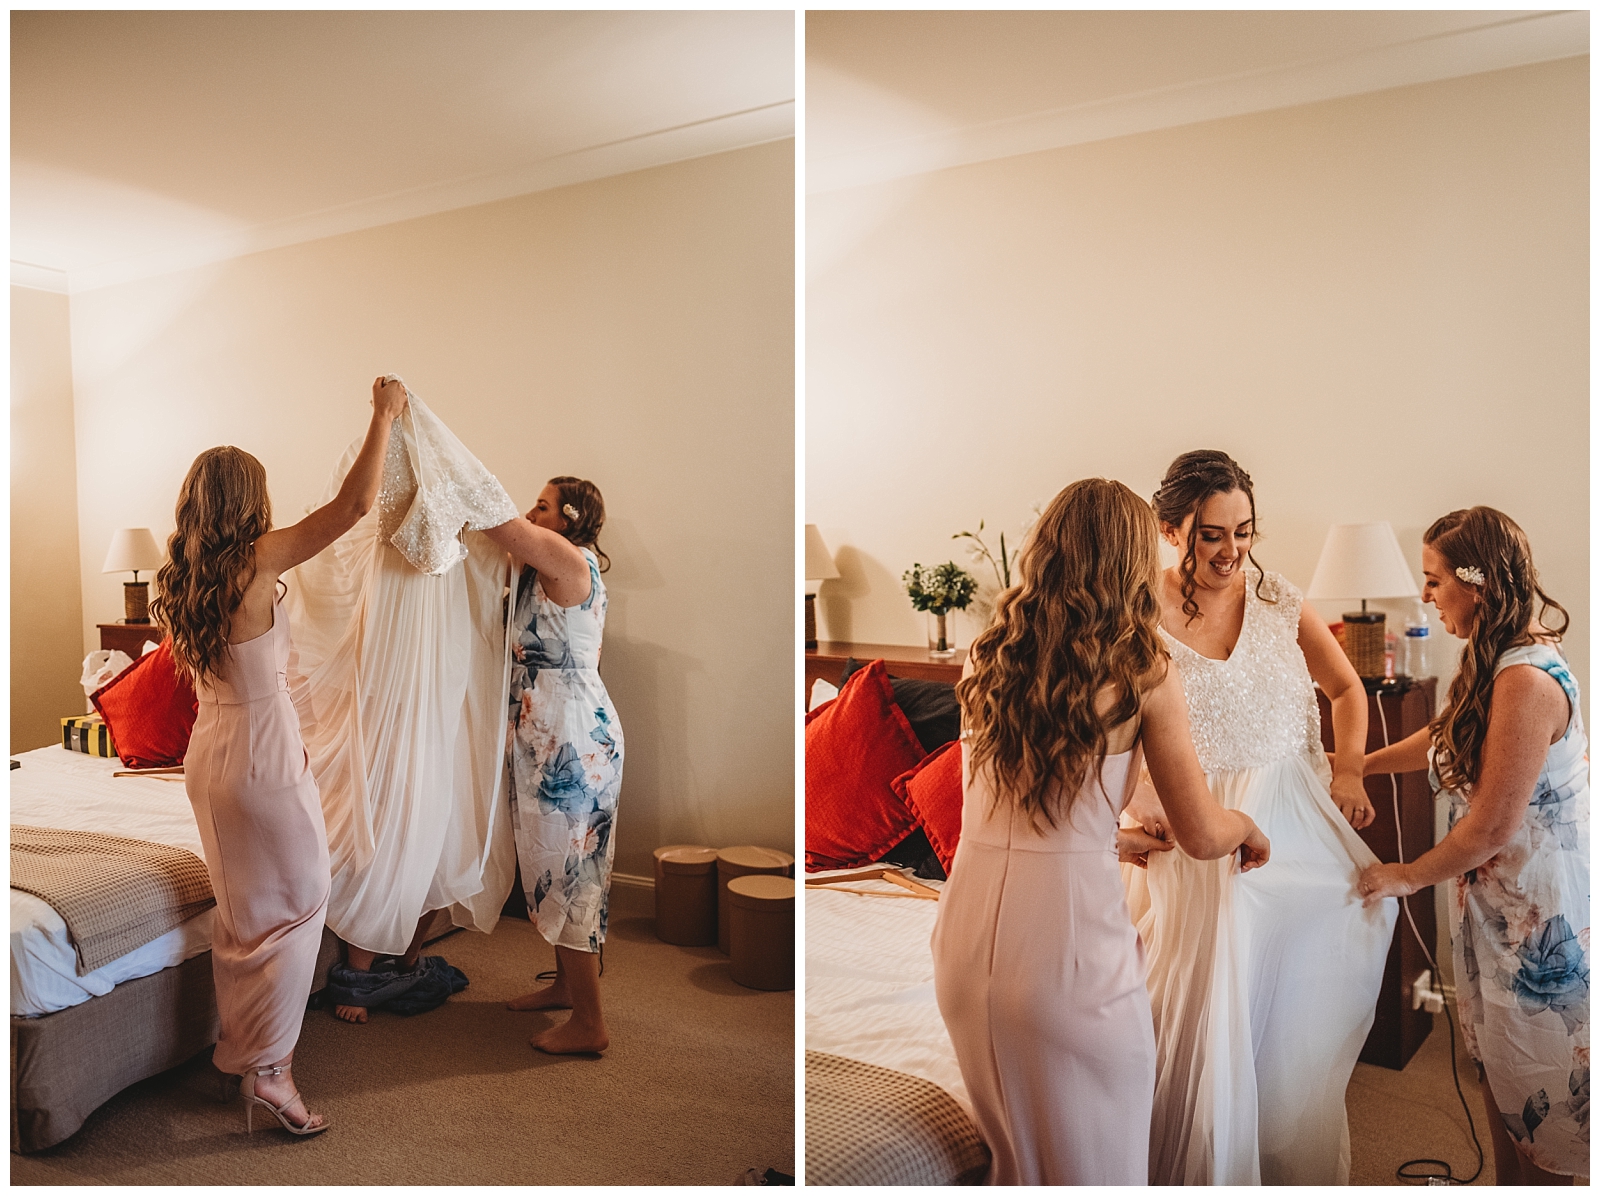 Two women help slide wedding dress over brides head. Bride with dress on smiling.